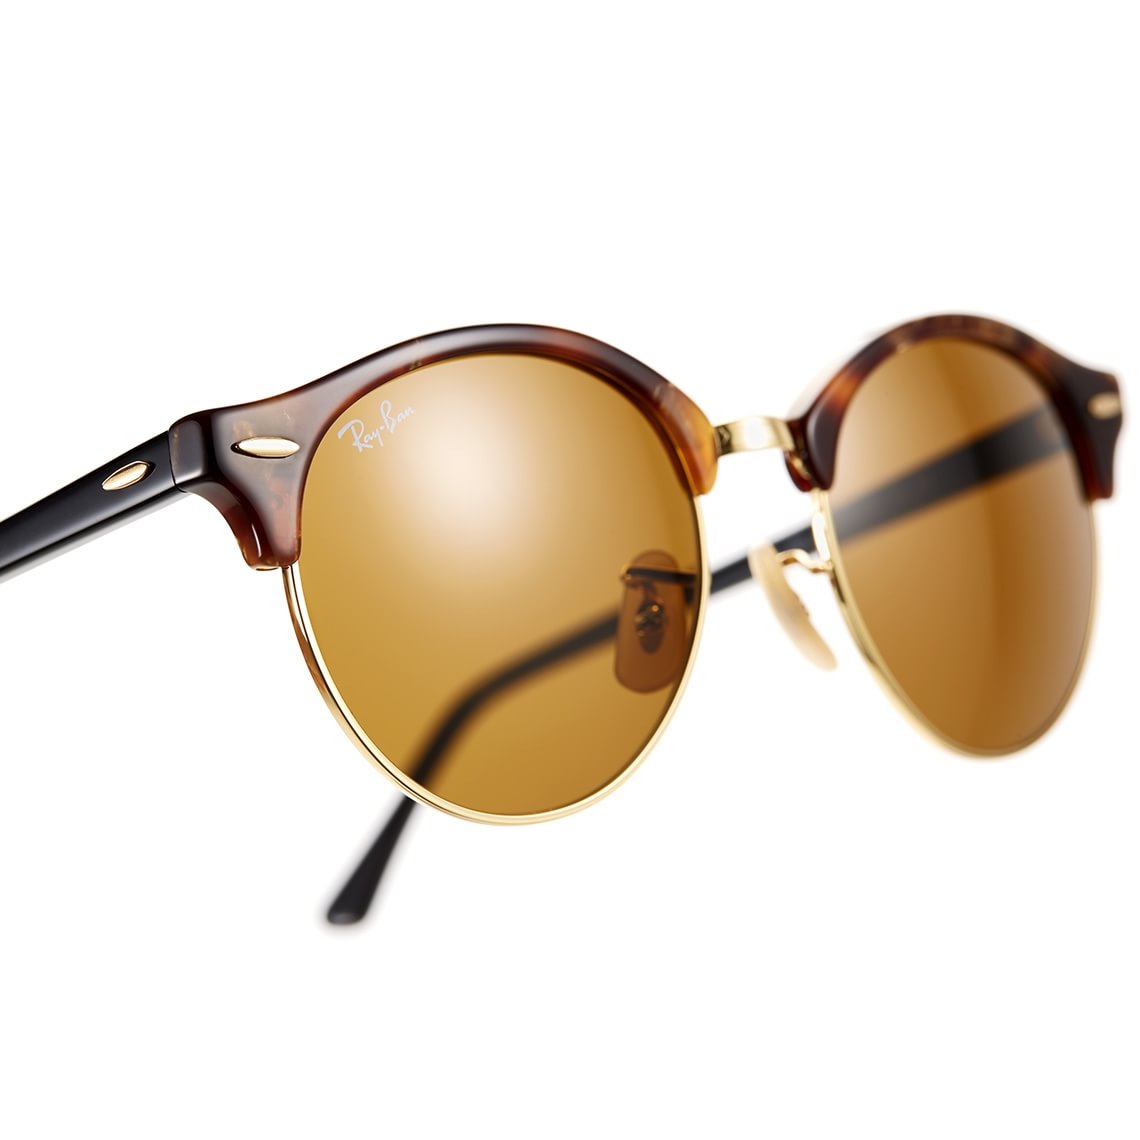 Ray-Ban Clubround RB4246 1160 51